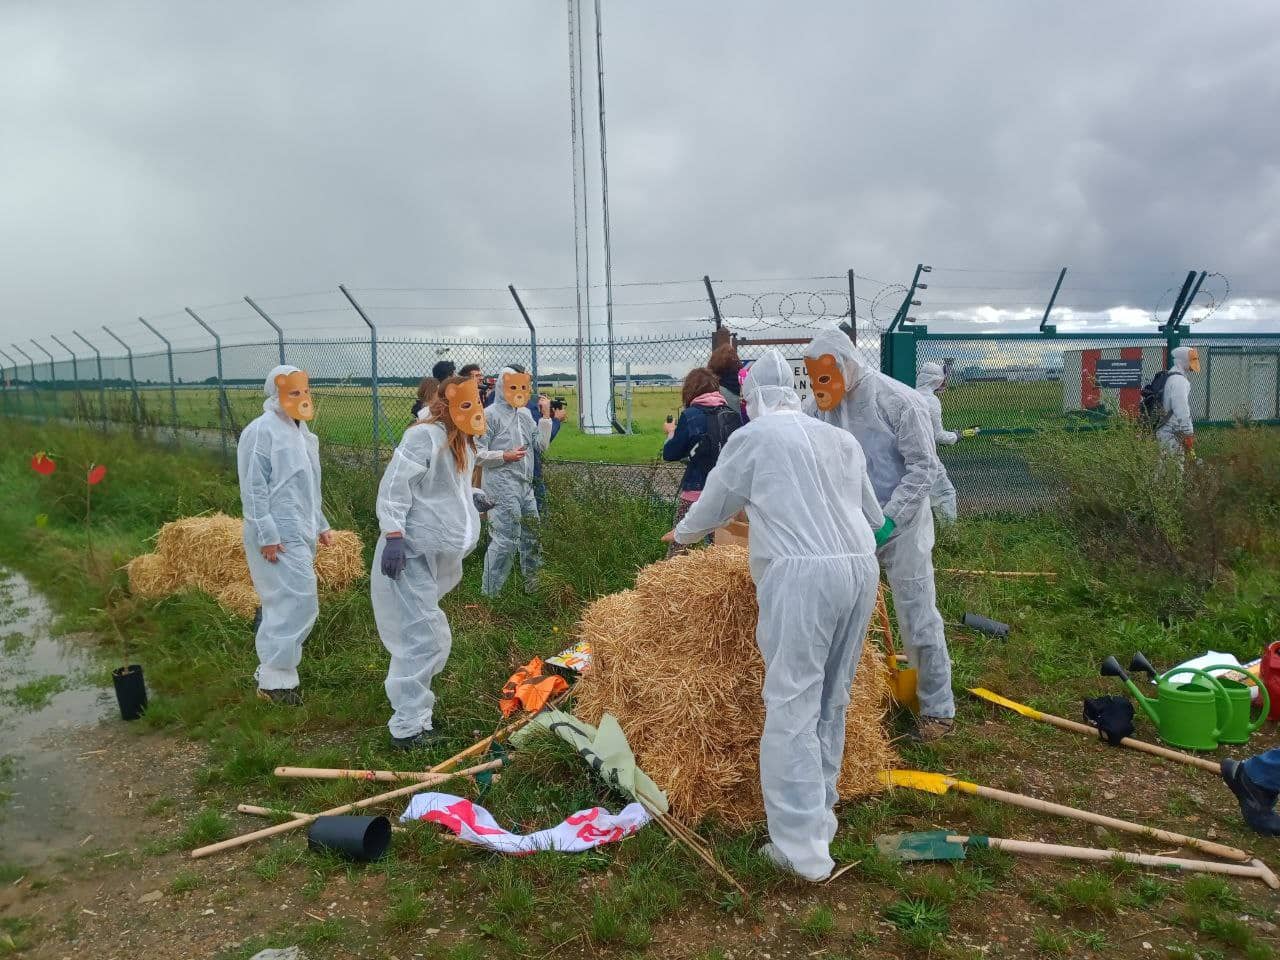 rebels in white overalls and animal masks carry hay bales into the airport runway